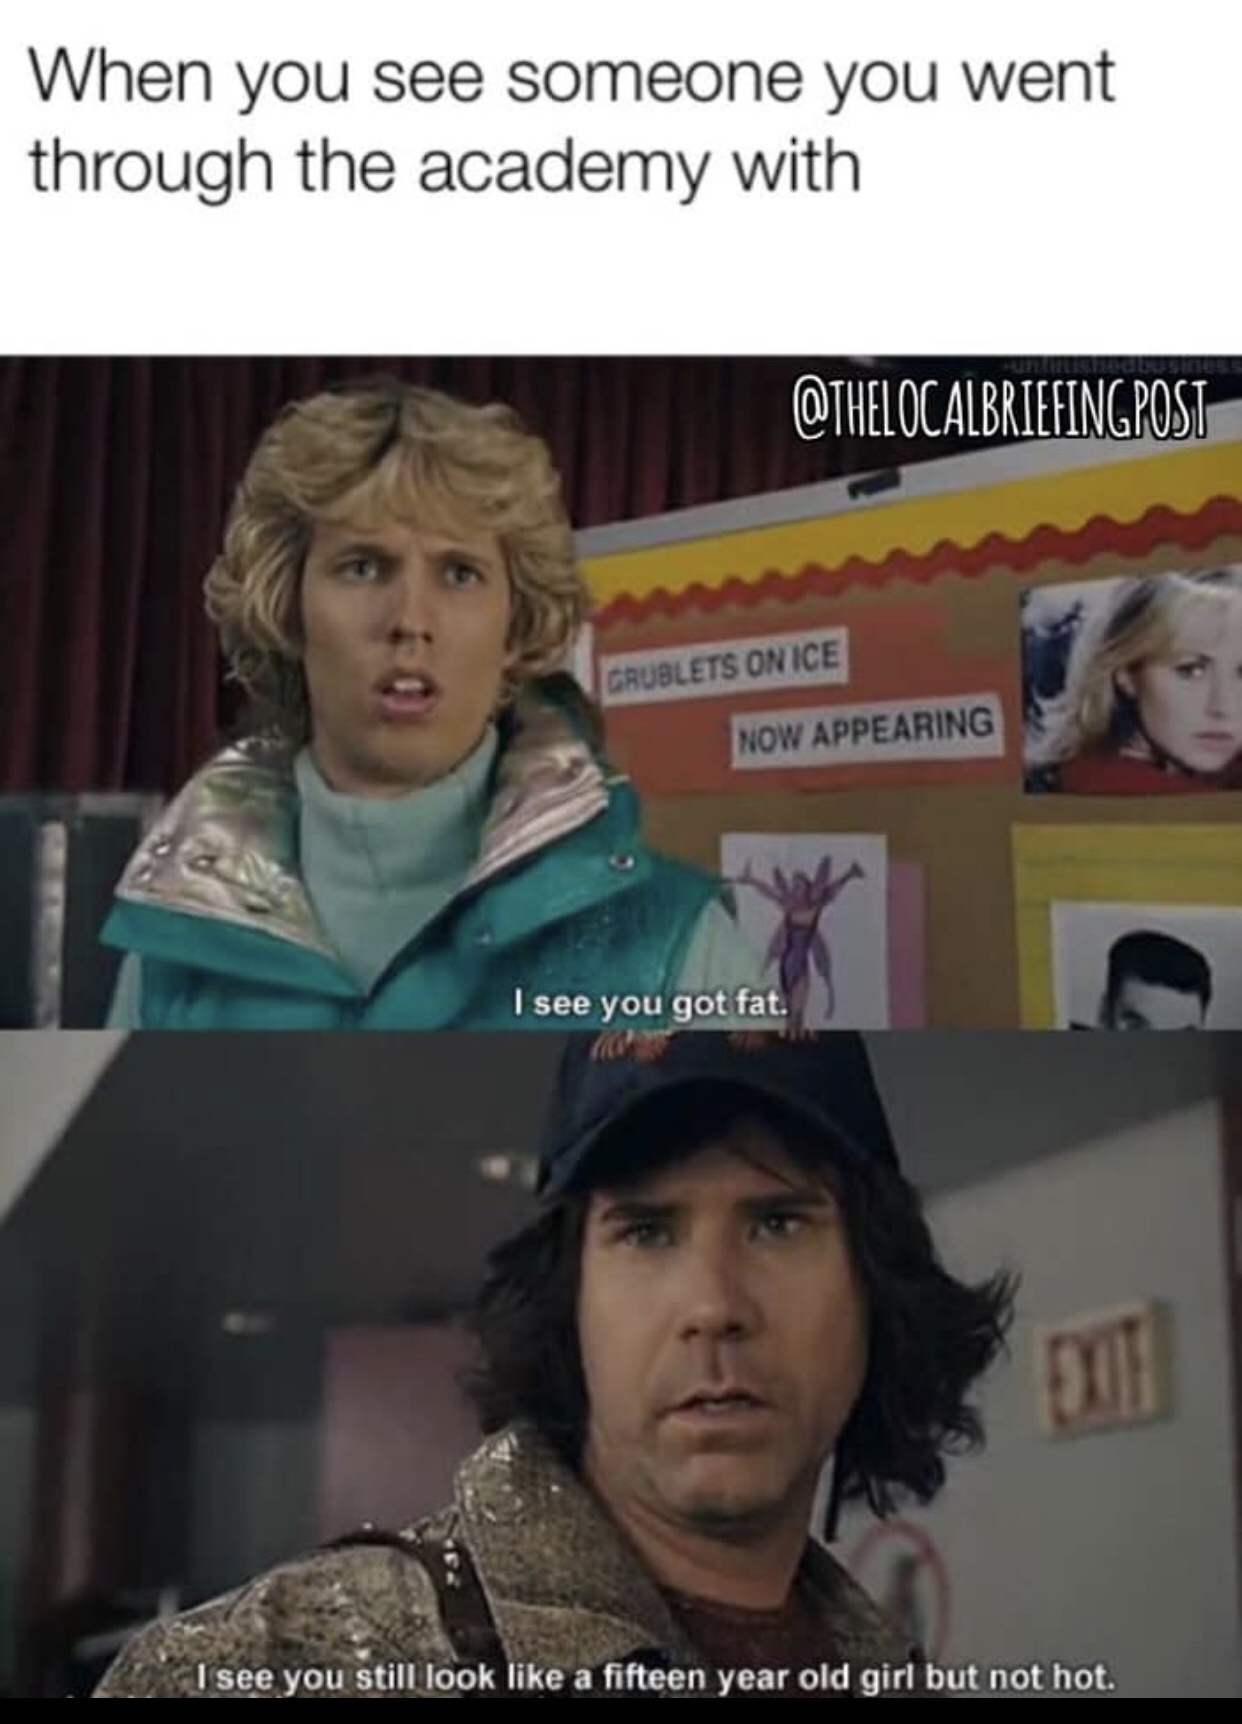 blades of glory meme - When you see someone you went through the academy with Grublets On Ice Now Appearing I see you got fat. I see you still look a fifteen year old girl but not hot.